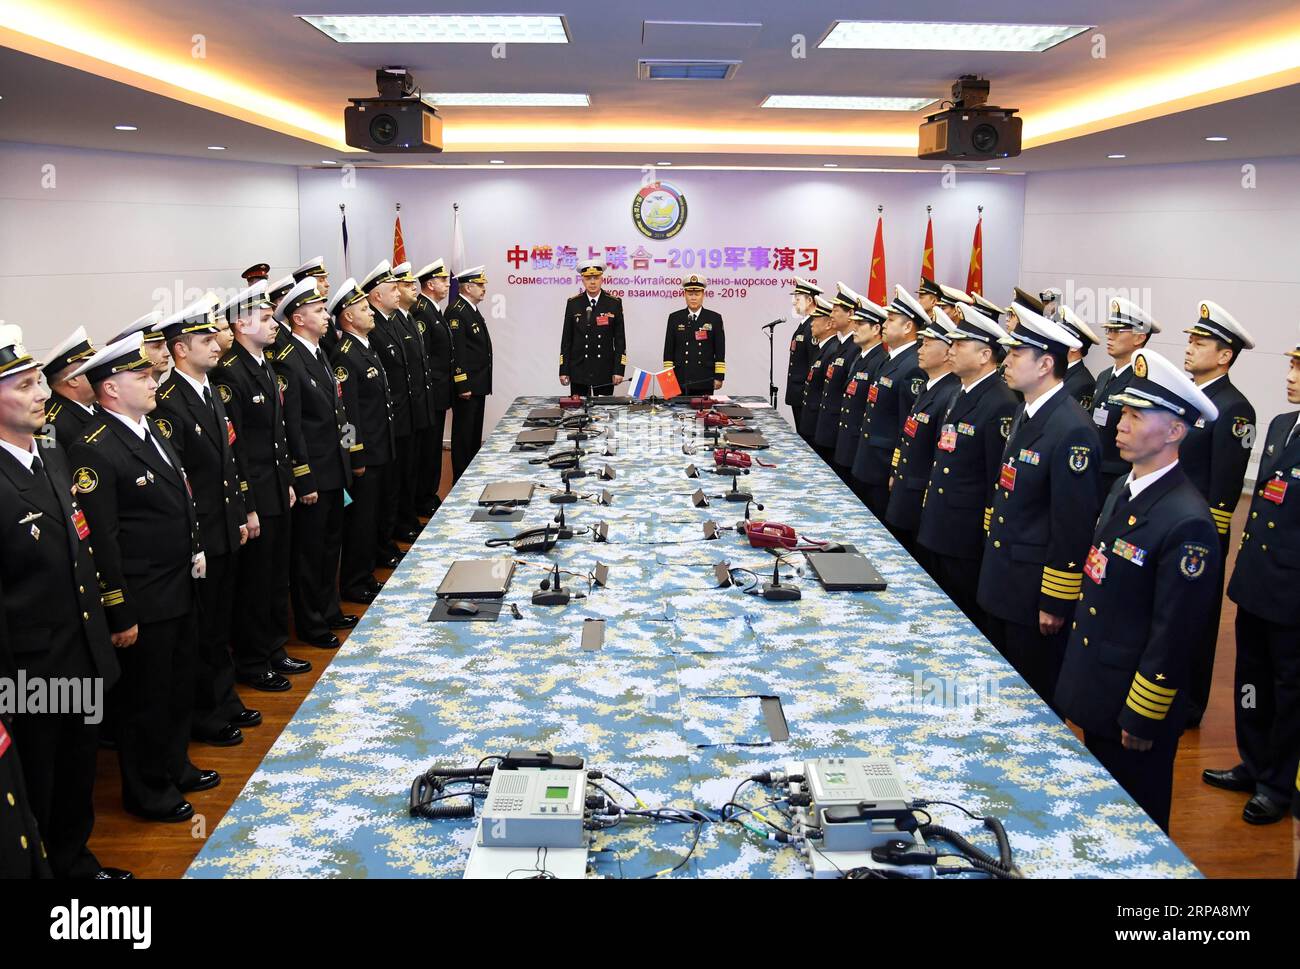 (190429) -- QINGDAO, April 29, 2019 (Xinhua) -- Qiu Yanpeng (C, R), chief director of Joint Sea-2019 exercise from the Chinese side and deputy commander of the Chinese People s Liberation Army (PLA) Navy, declares the opening of the Sino-Russian Joint Sea-2019 exercise in Qingdao, east China s Shandong Province, April 29, 2019. Russian naval vessels arrived in Qingdao on Monday to participate in the Sino-Russian Joint Sea-2019 exercise. The exercise will focus on joint sea defense, which aims to consolidate and develop the China-Russia comprehensive strategic partnership of coordination, deepe Stock Photo